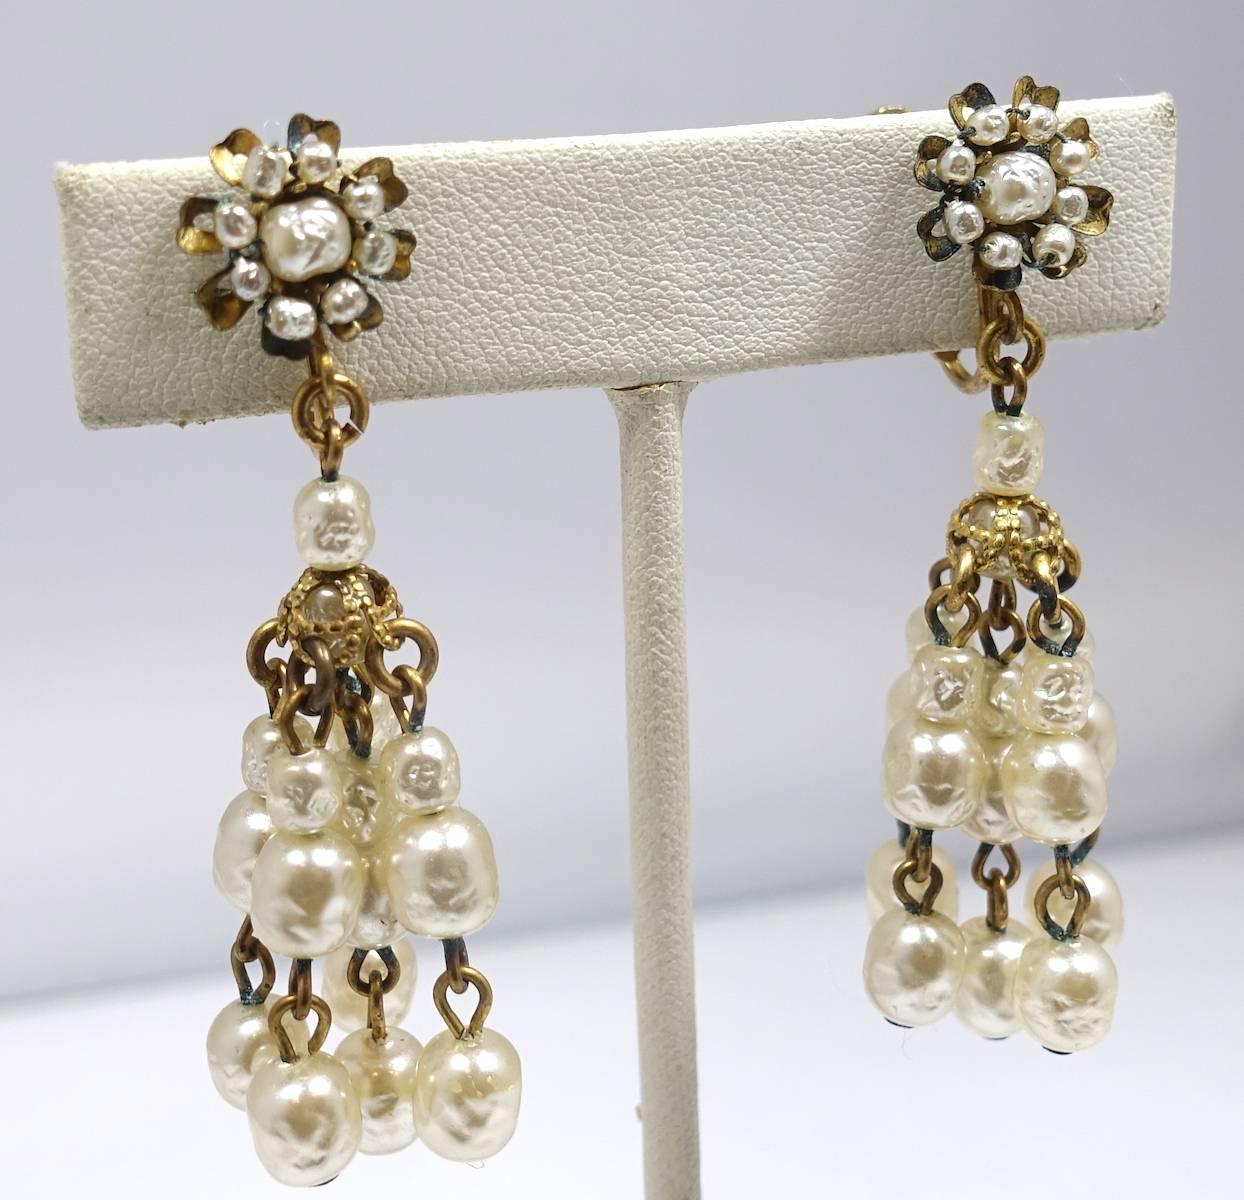 These vintage signed Miriam Haskell earrings feature baroque faux pearls in a gold tone metal setting.  The earrings measure 2-1/8” x 3/4” and signed “Miriam Haskell”.  They are in excellent condition.